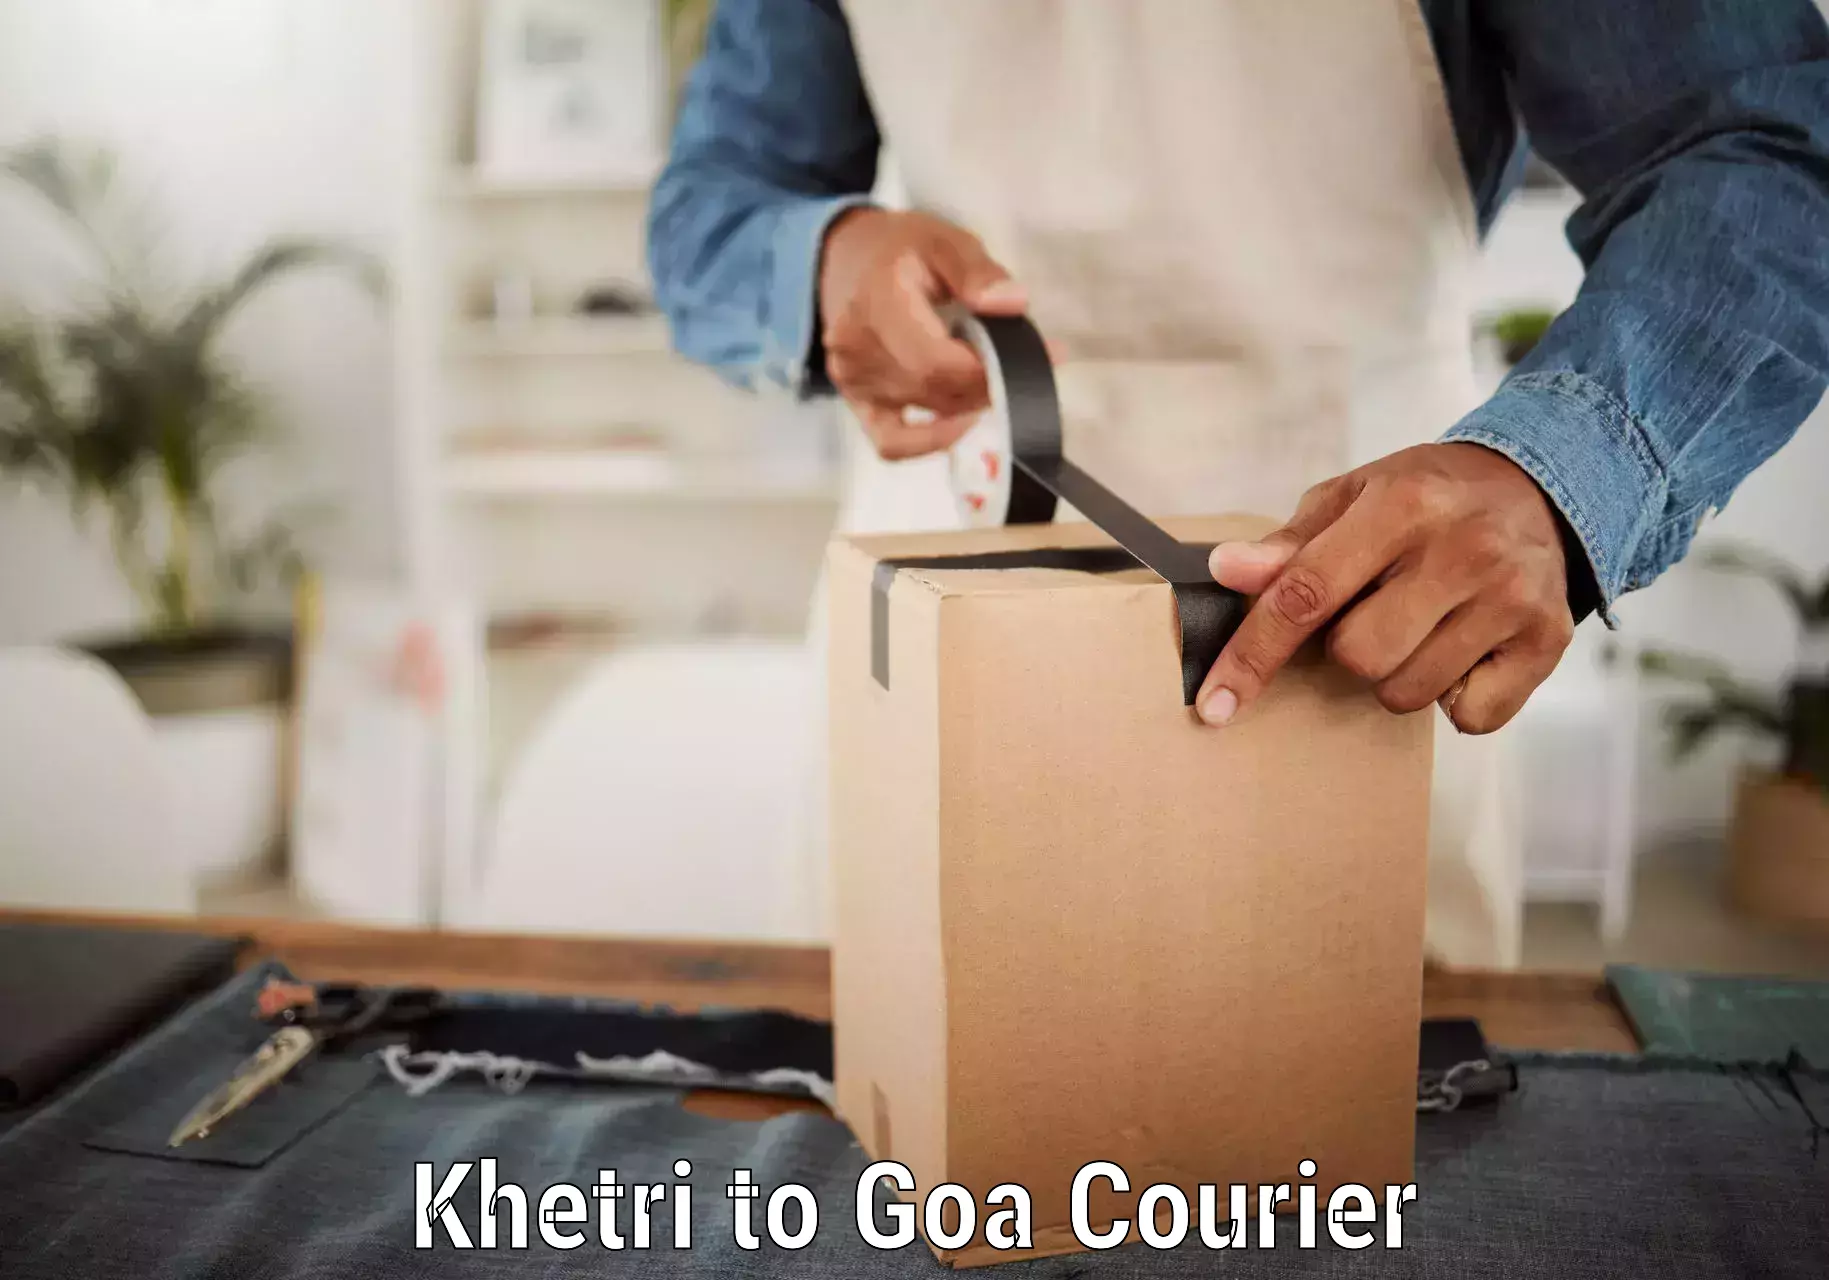 Nationwide delivery network Khetri to Goa